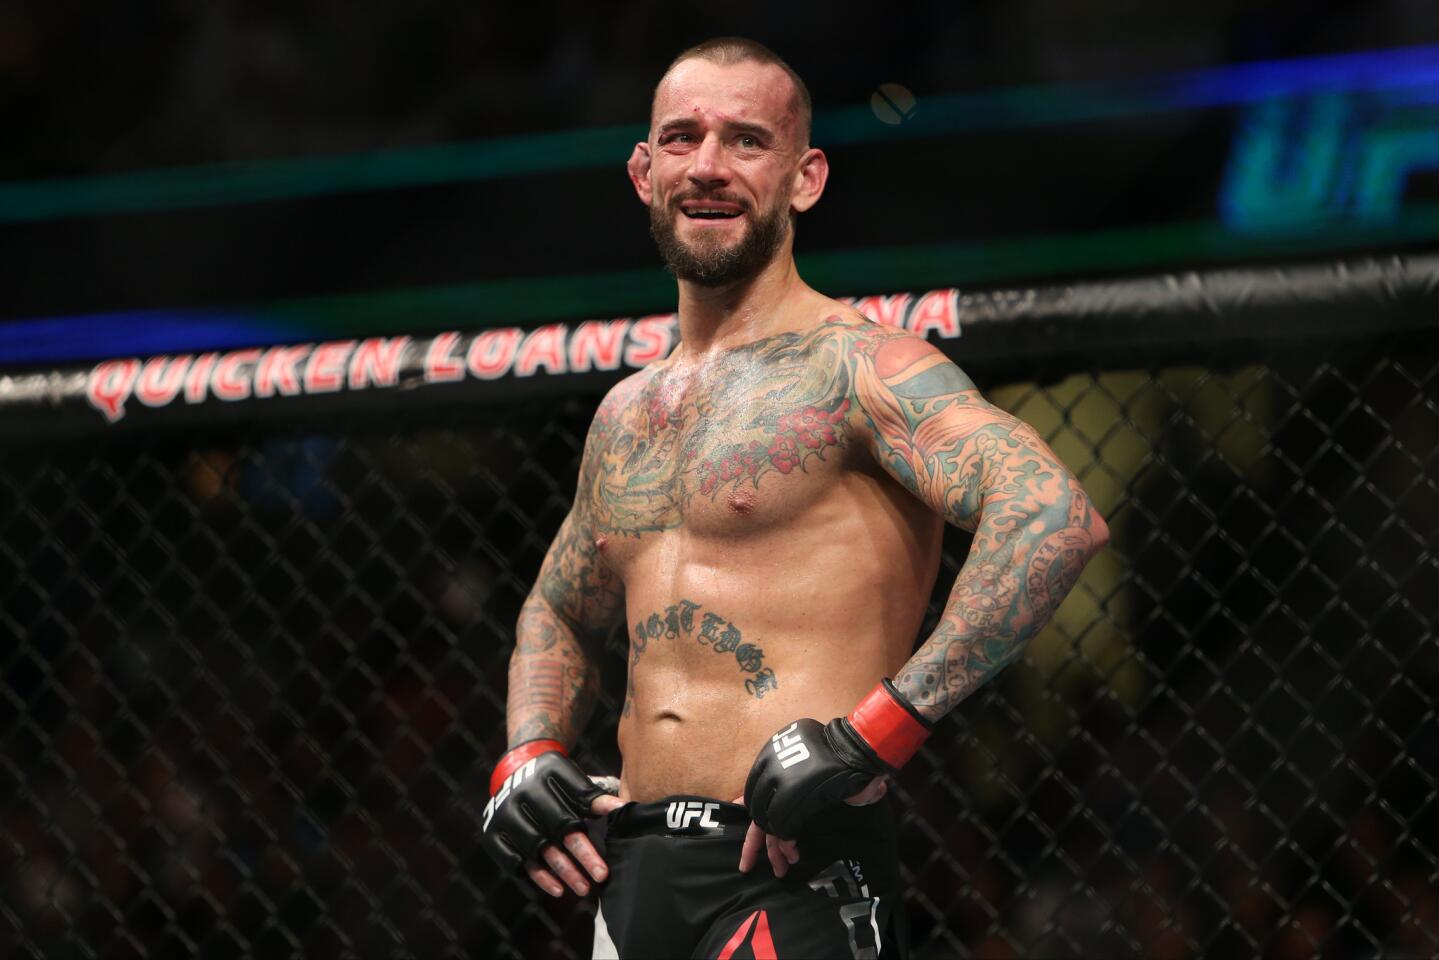 CM Punk reacts to his loss by submission to Mickey Gall on Sept. 10 at UFC 203 in Cleveland.